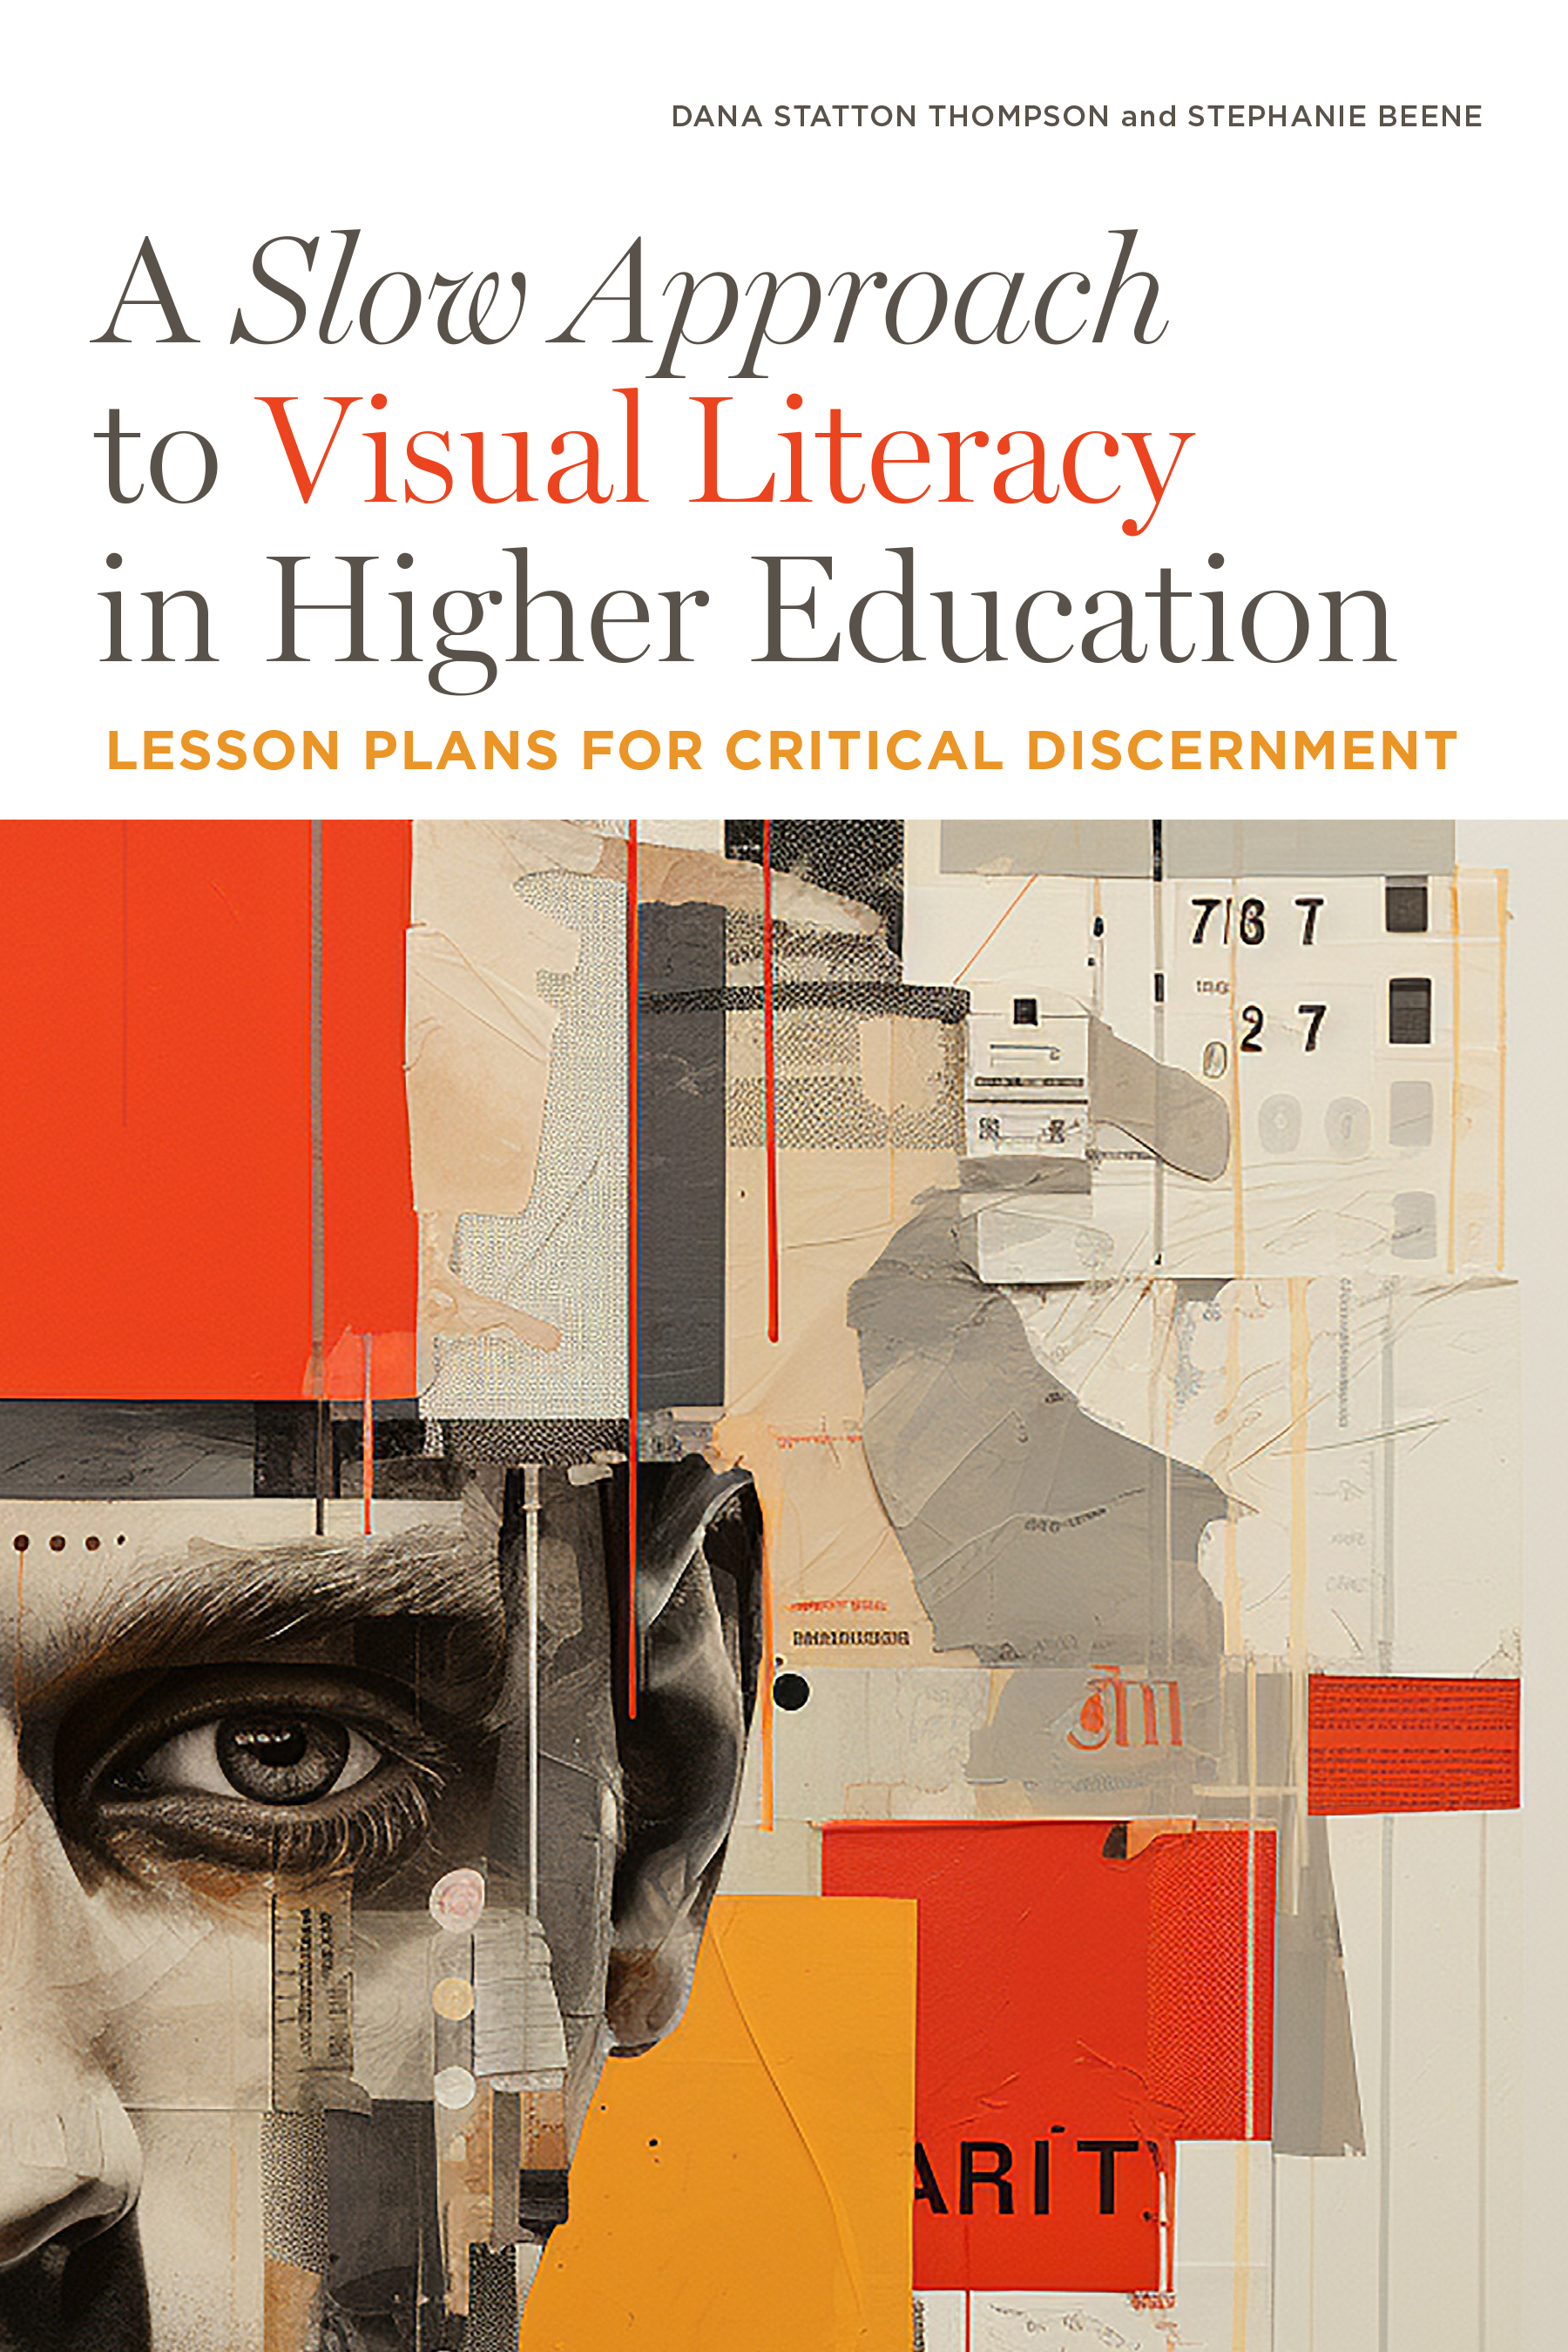 Slow Approach to Visual Literacy in Higher Education